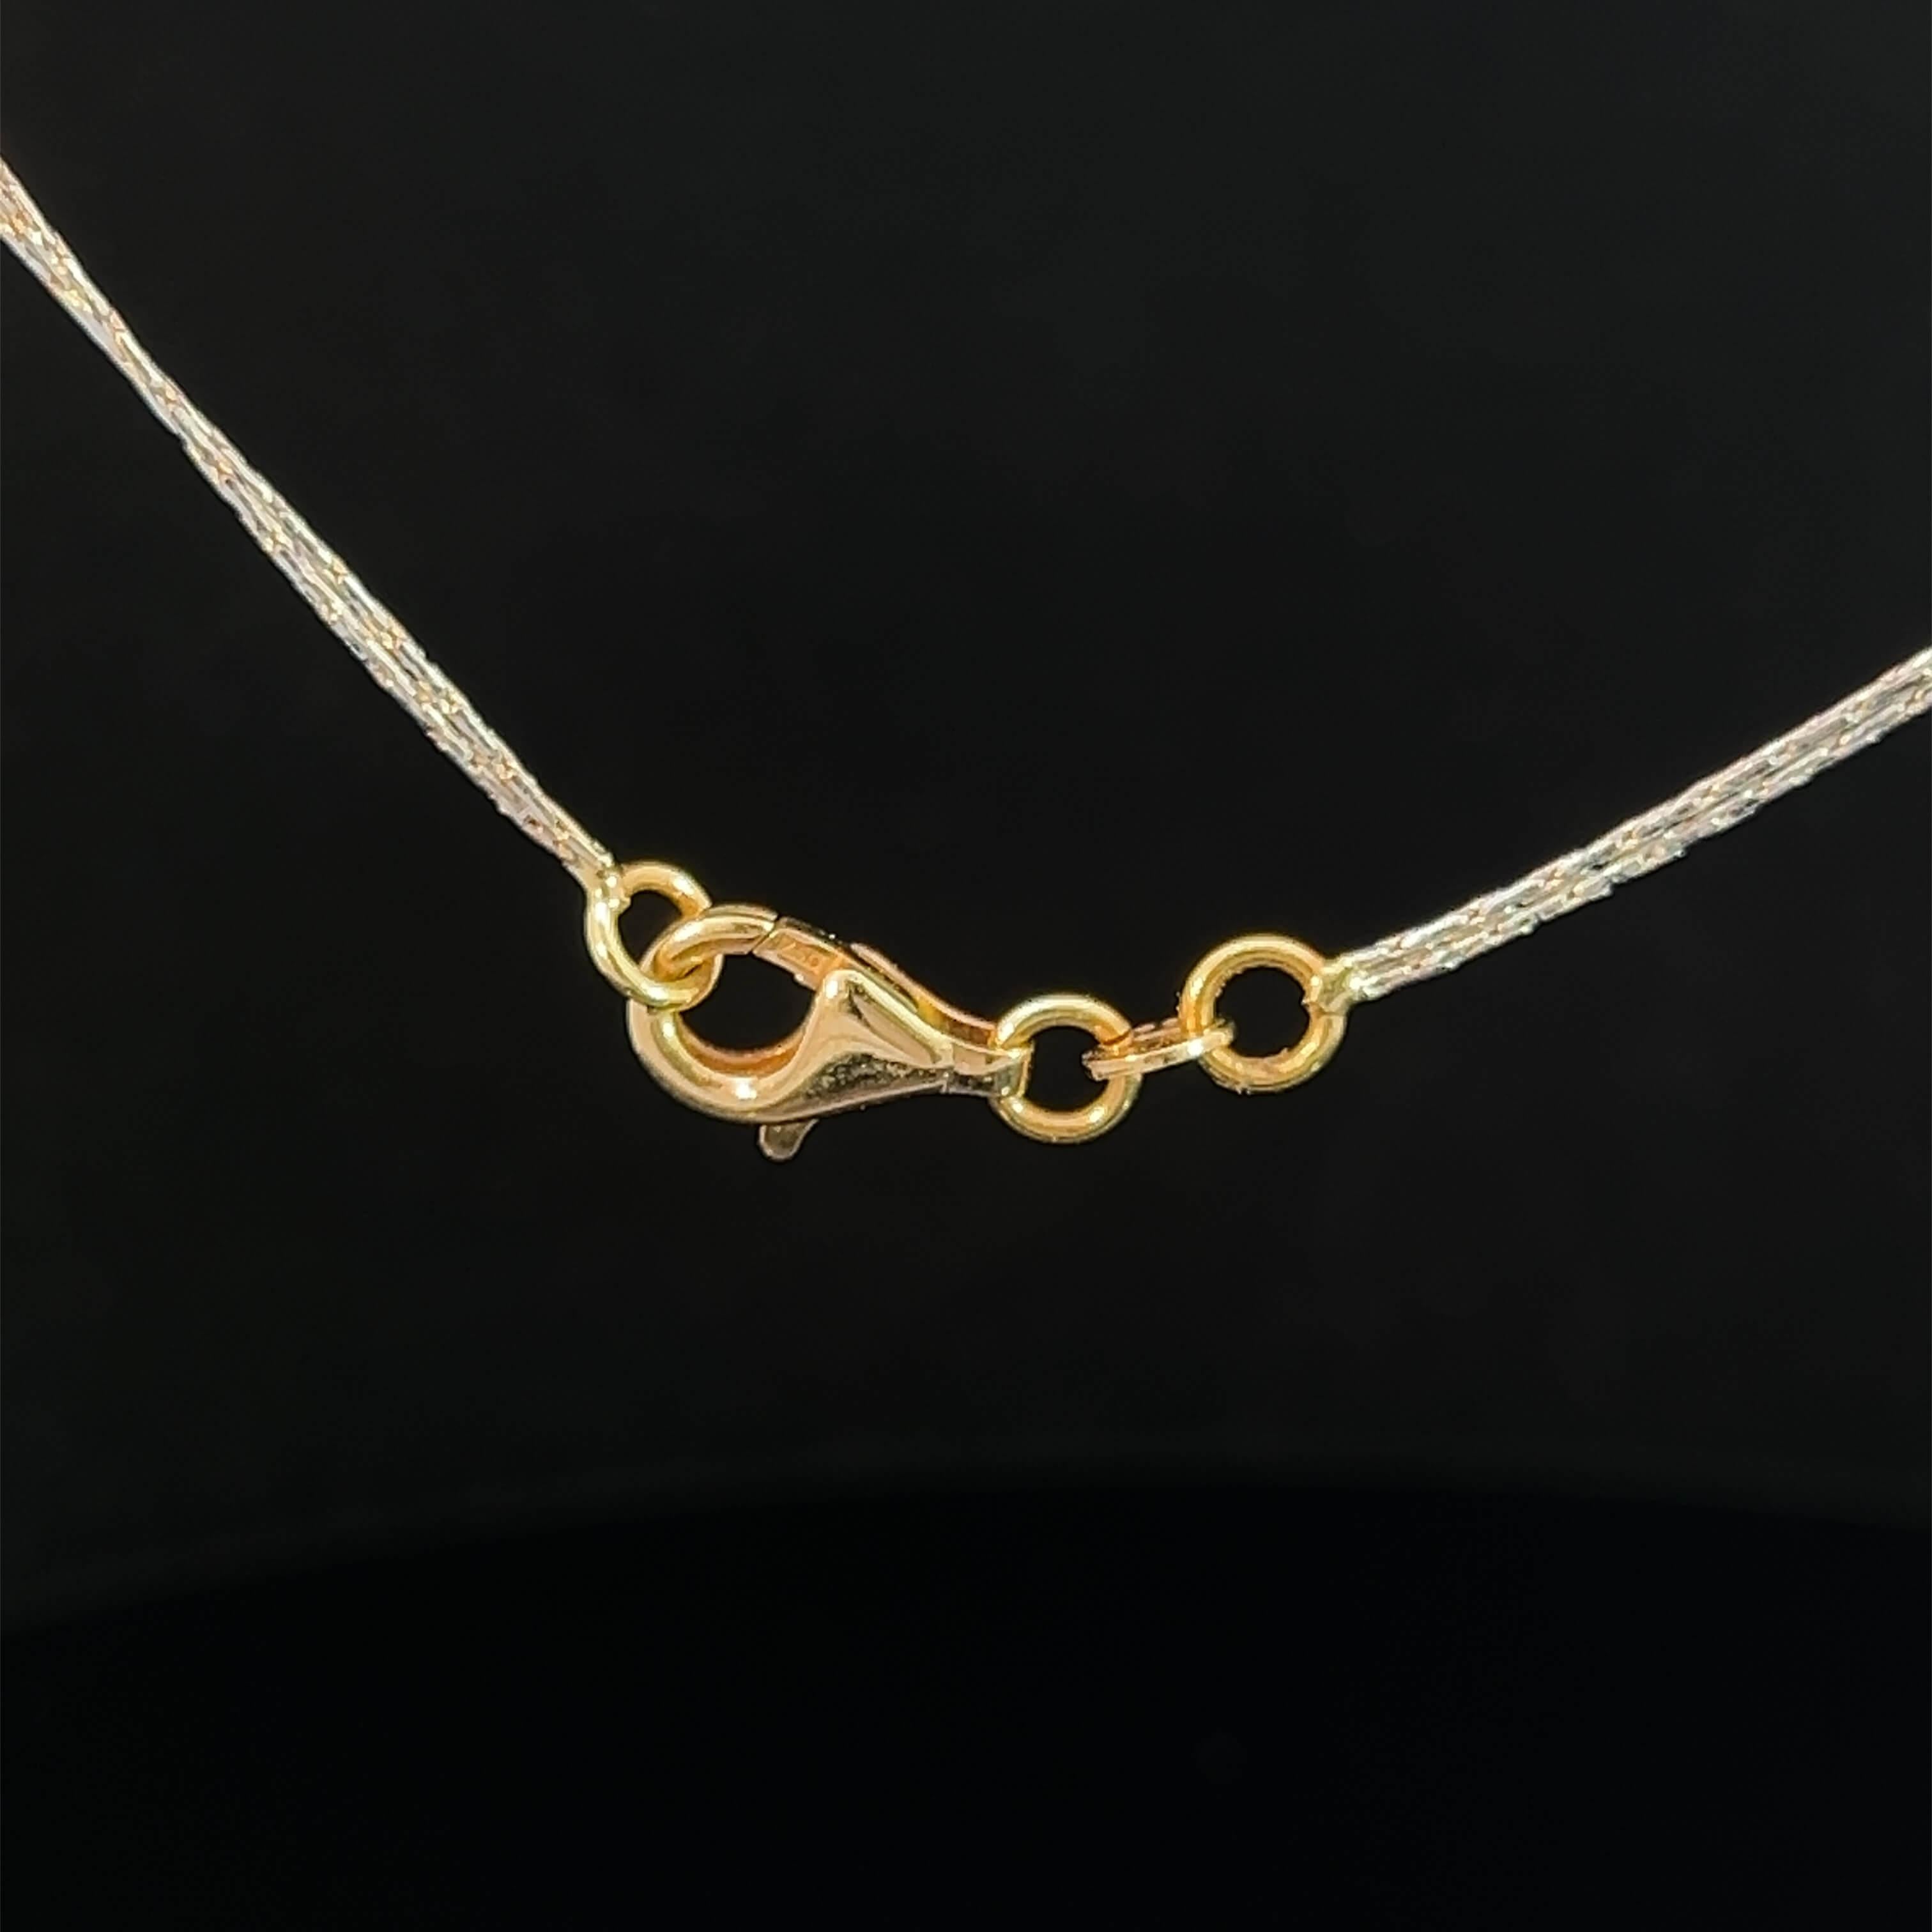 Modern 18k Two Tone Gold Star & Clouds Necklet Circa 2000s For Sale 2